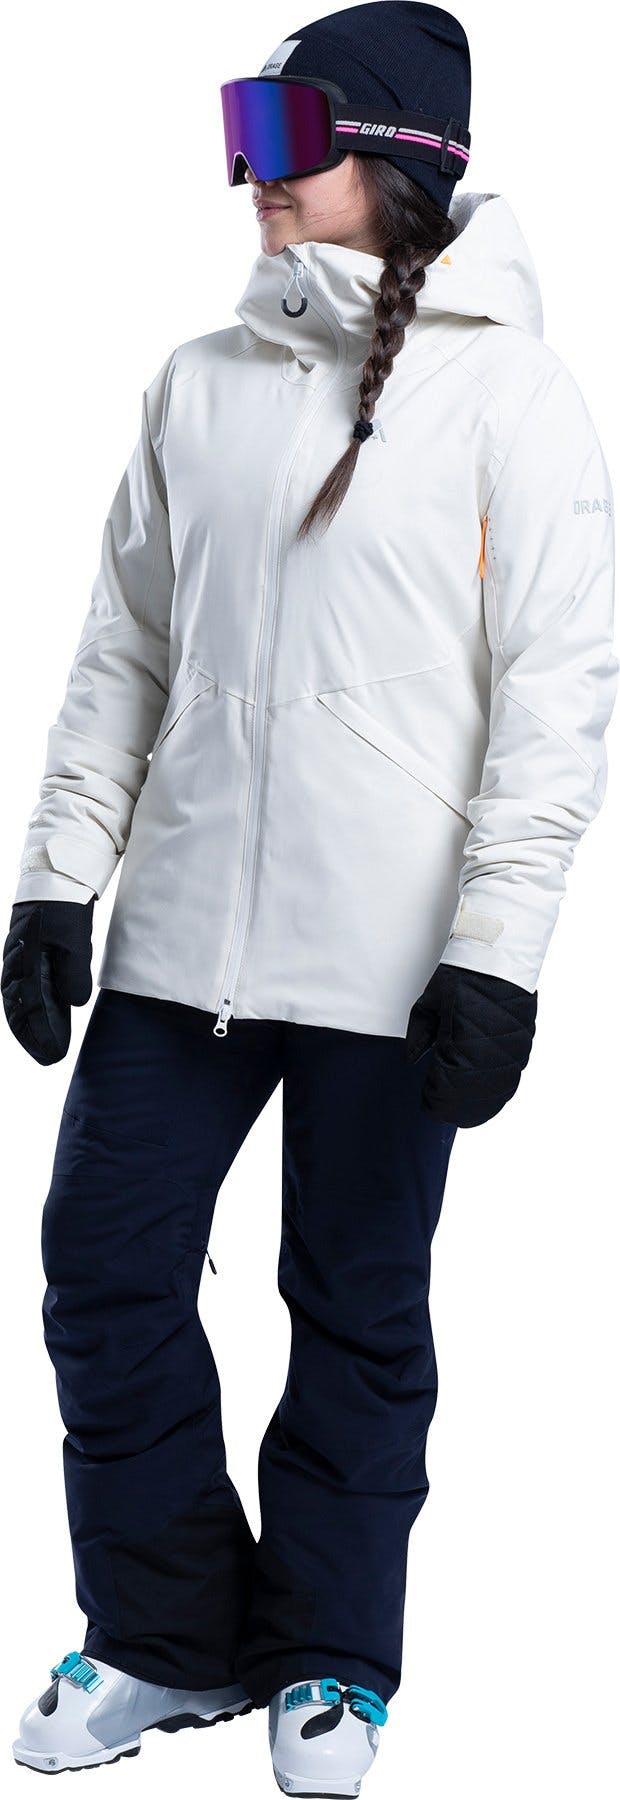 Product image for Lillooet Jacket - Women's